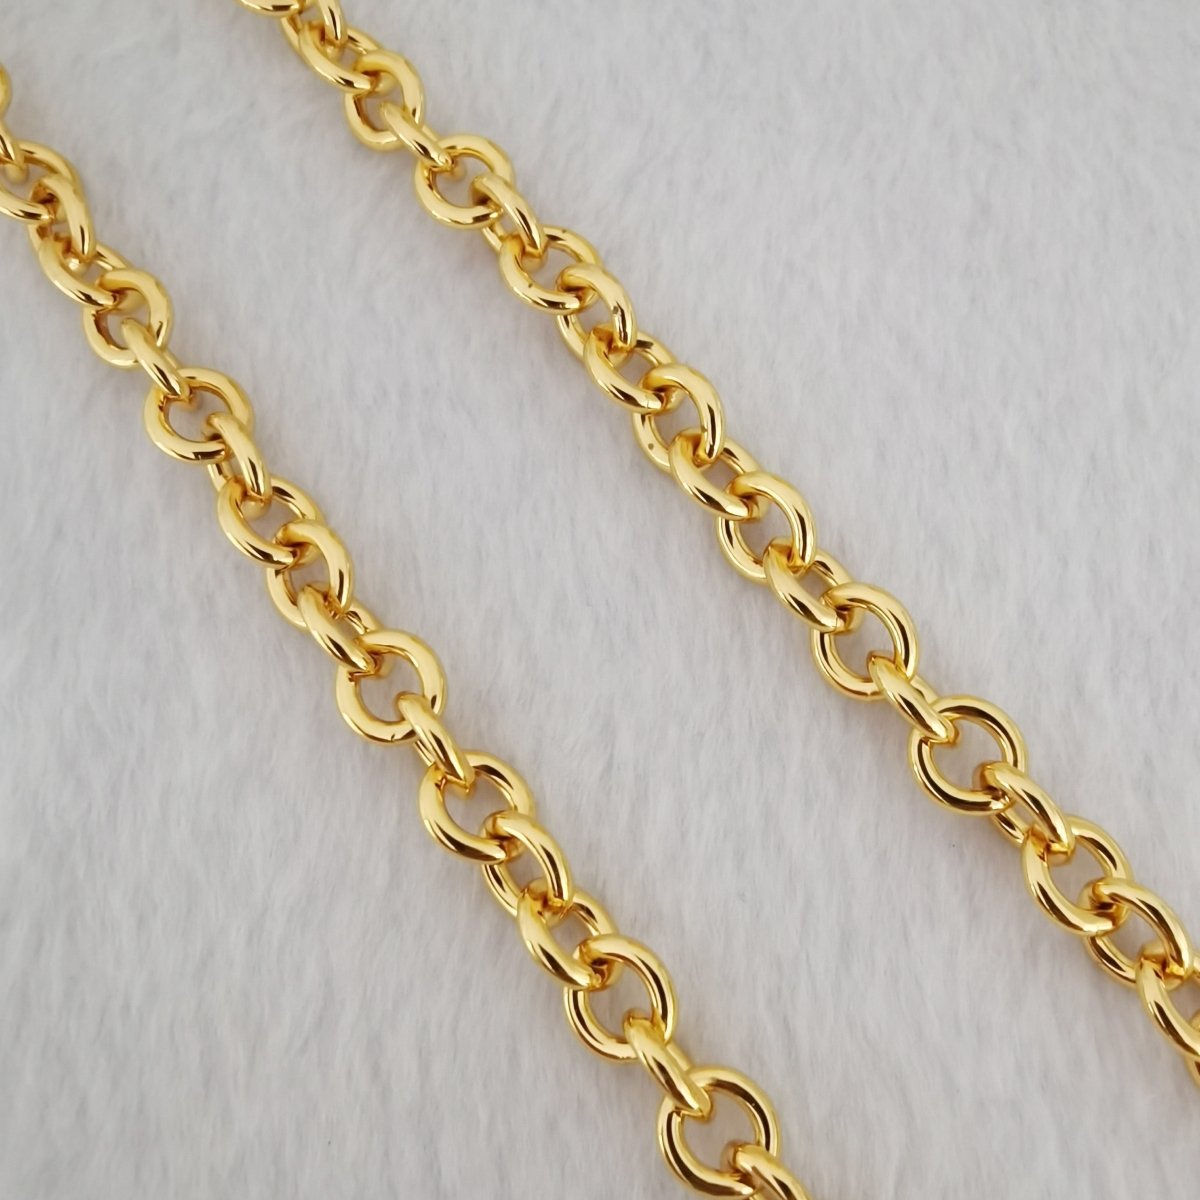 Silver, 18K Gold, 24K Gold Filled ROLO Chain Sold By Yard For Jewelry Making, Necklace Bracelet Anklet Component Supply | ROLL-473(XP-001), ROLL-476(XP-005), ROLL-477(XP-004) Clearance Pricing - DLUXCA